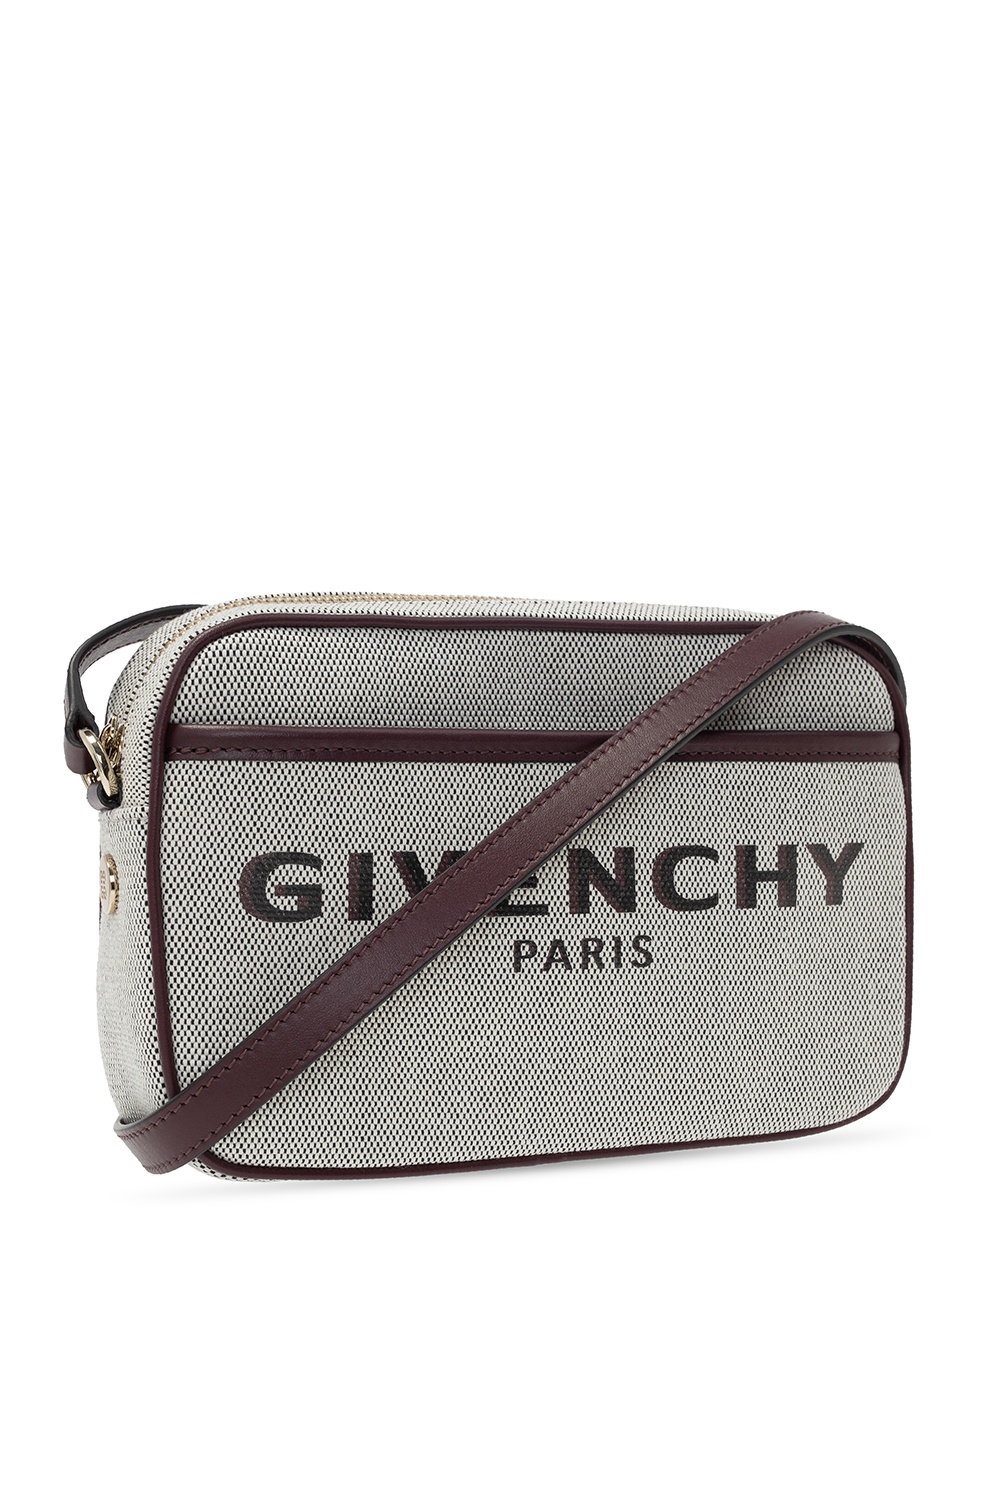 givenchy earrings ‘Camera’ shoulder bag with logo